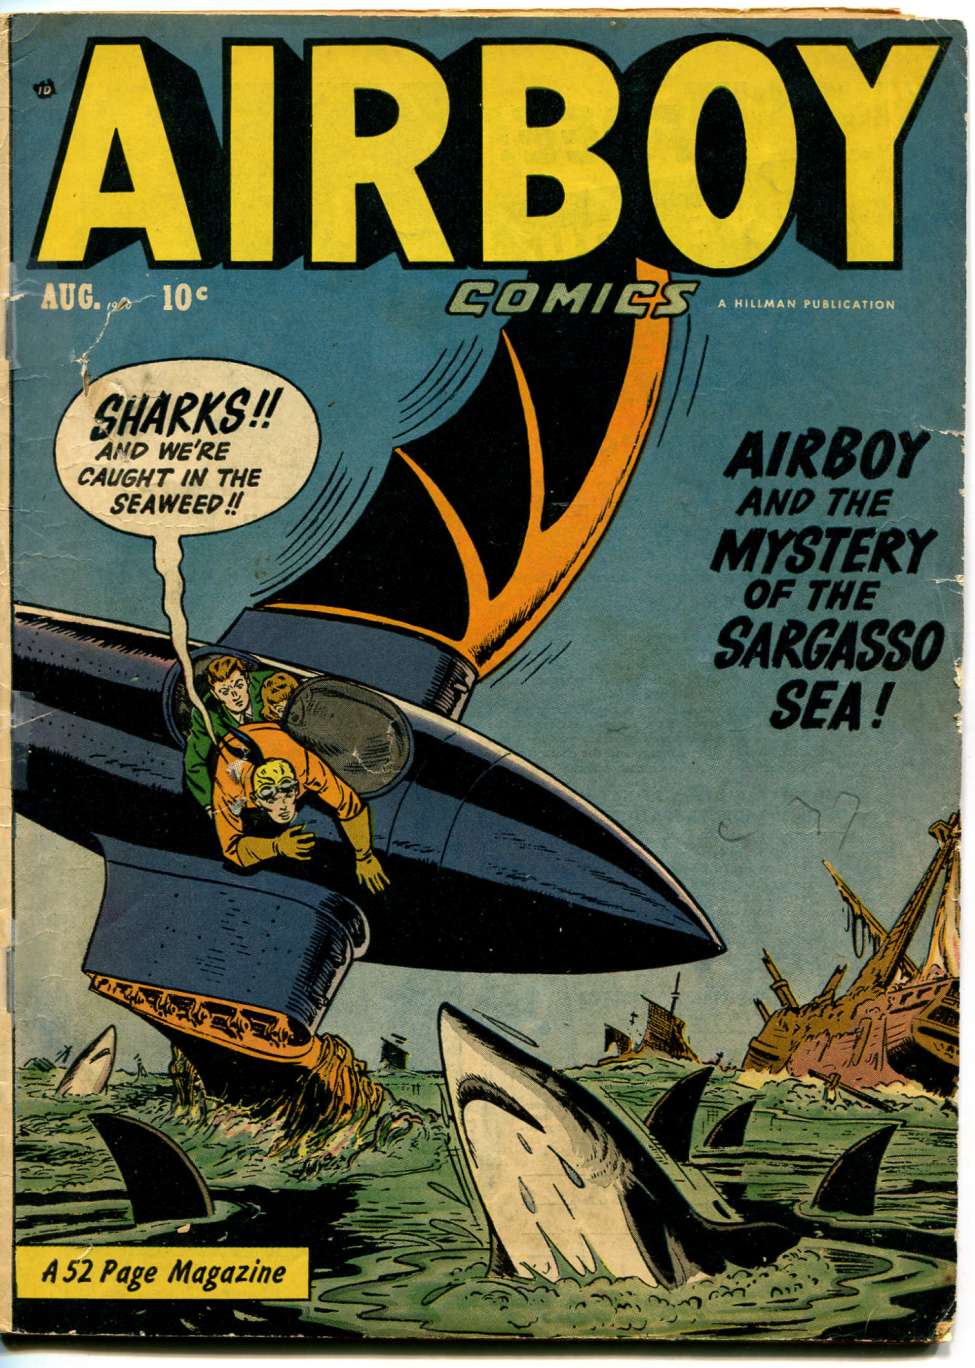 Book Cover For Airboy Comics v7 7